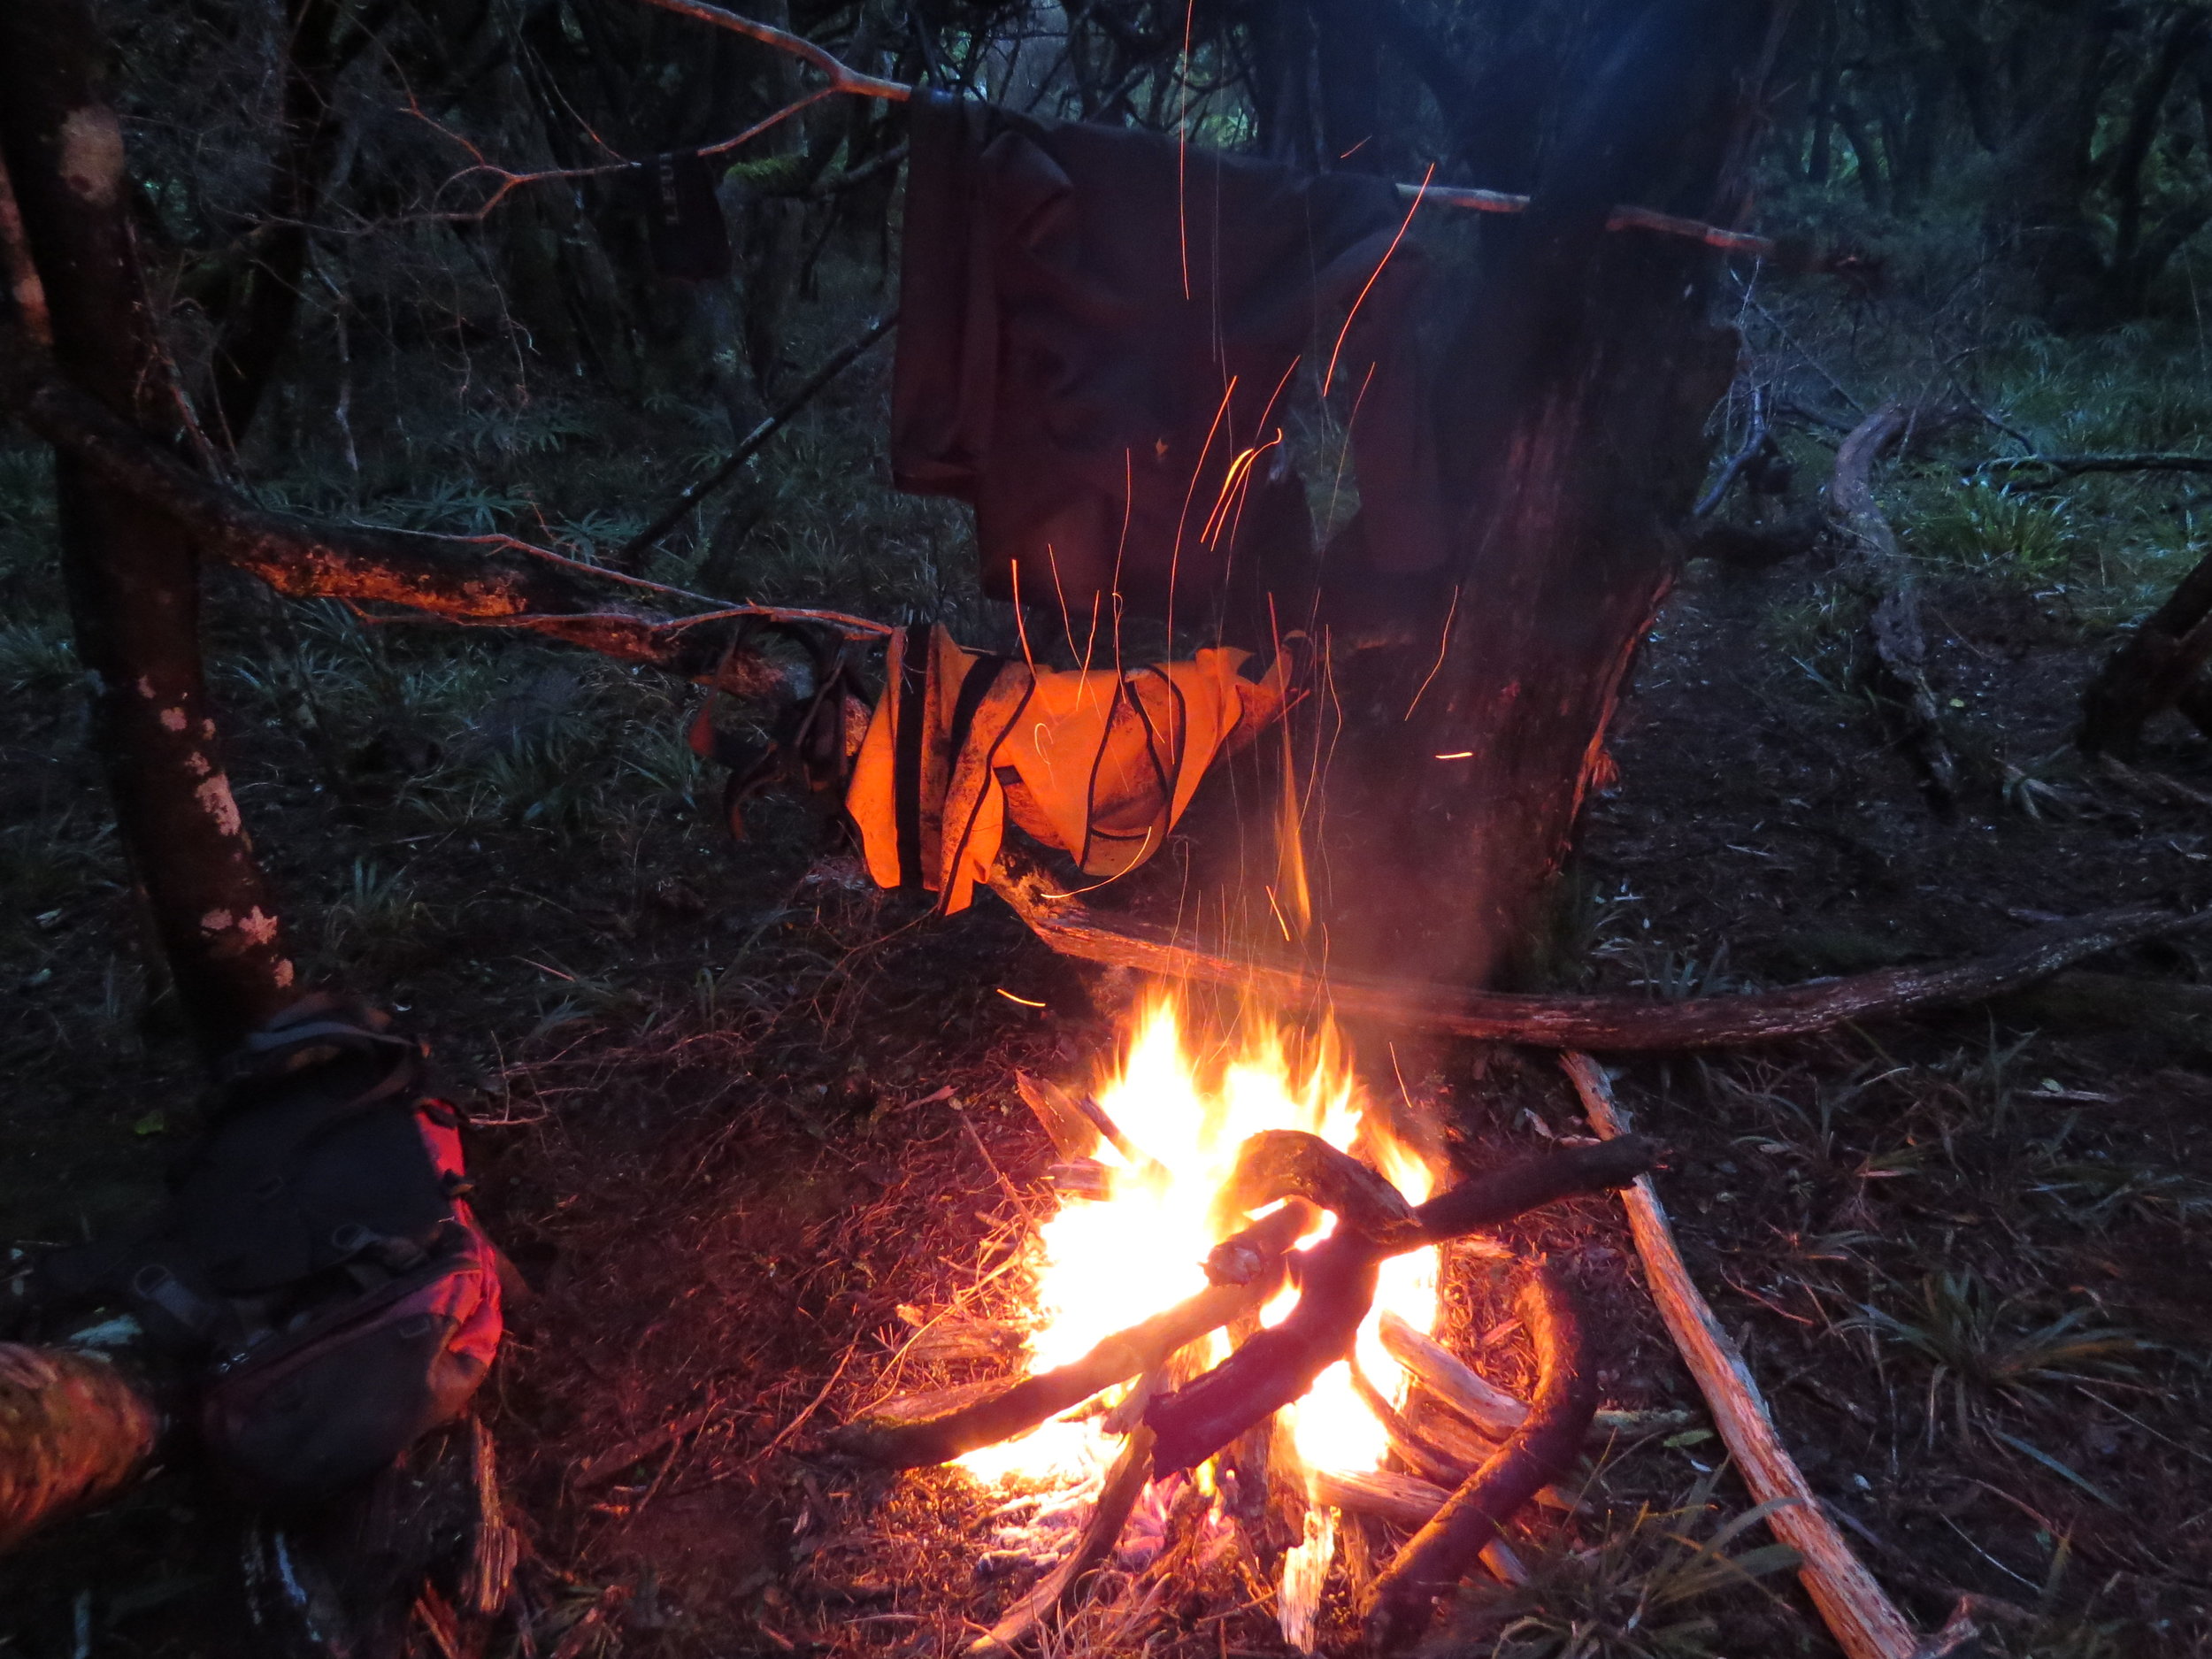  Drying gear next to a camp fire each evening was crucial for staying out for multiple days on Stewart Island, being dry and comfortable at the start of each morning is better than the alternative! 